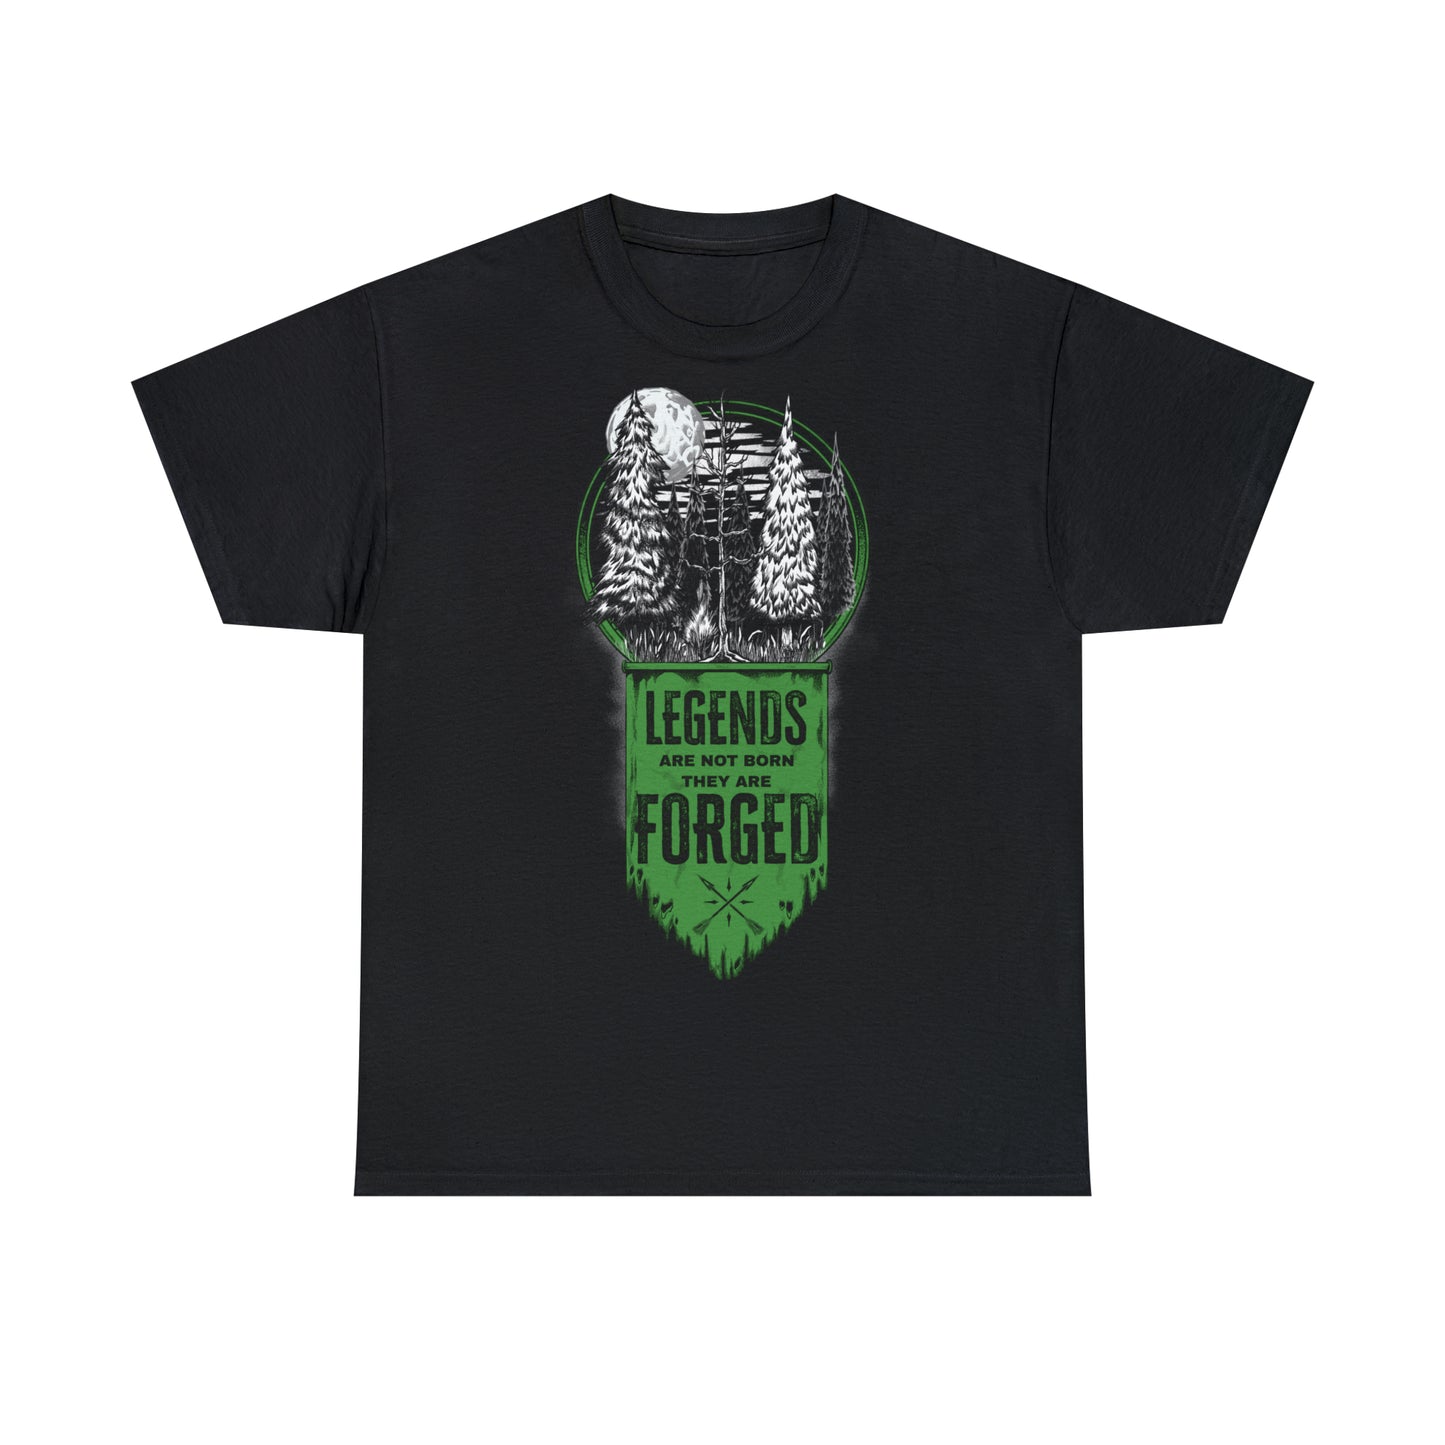 Legends Tee: "A Forest Of Vanity And Valour" Edition - Black